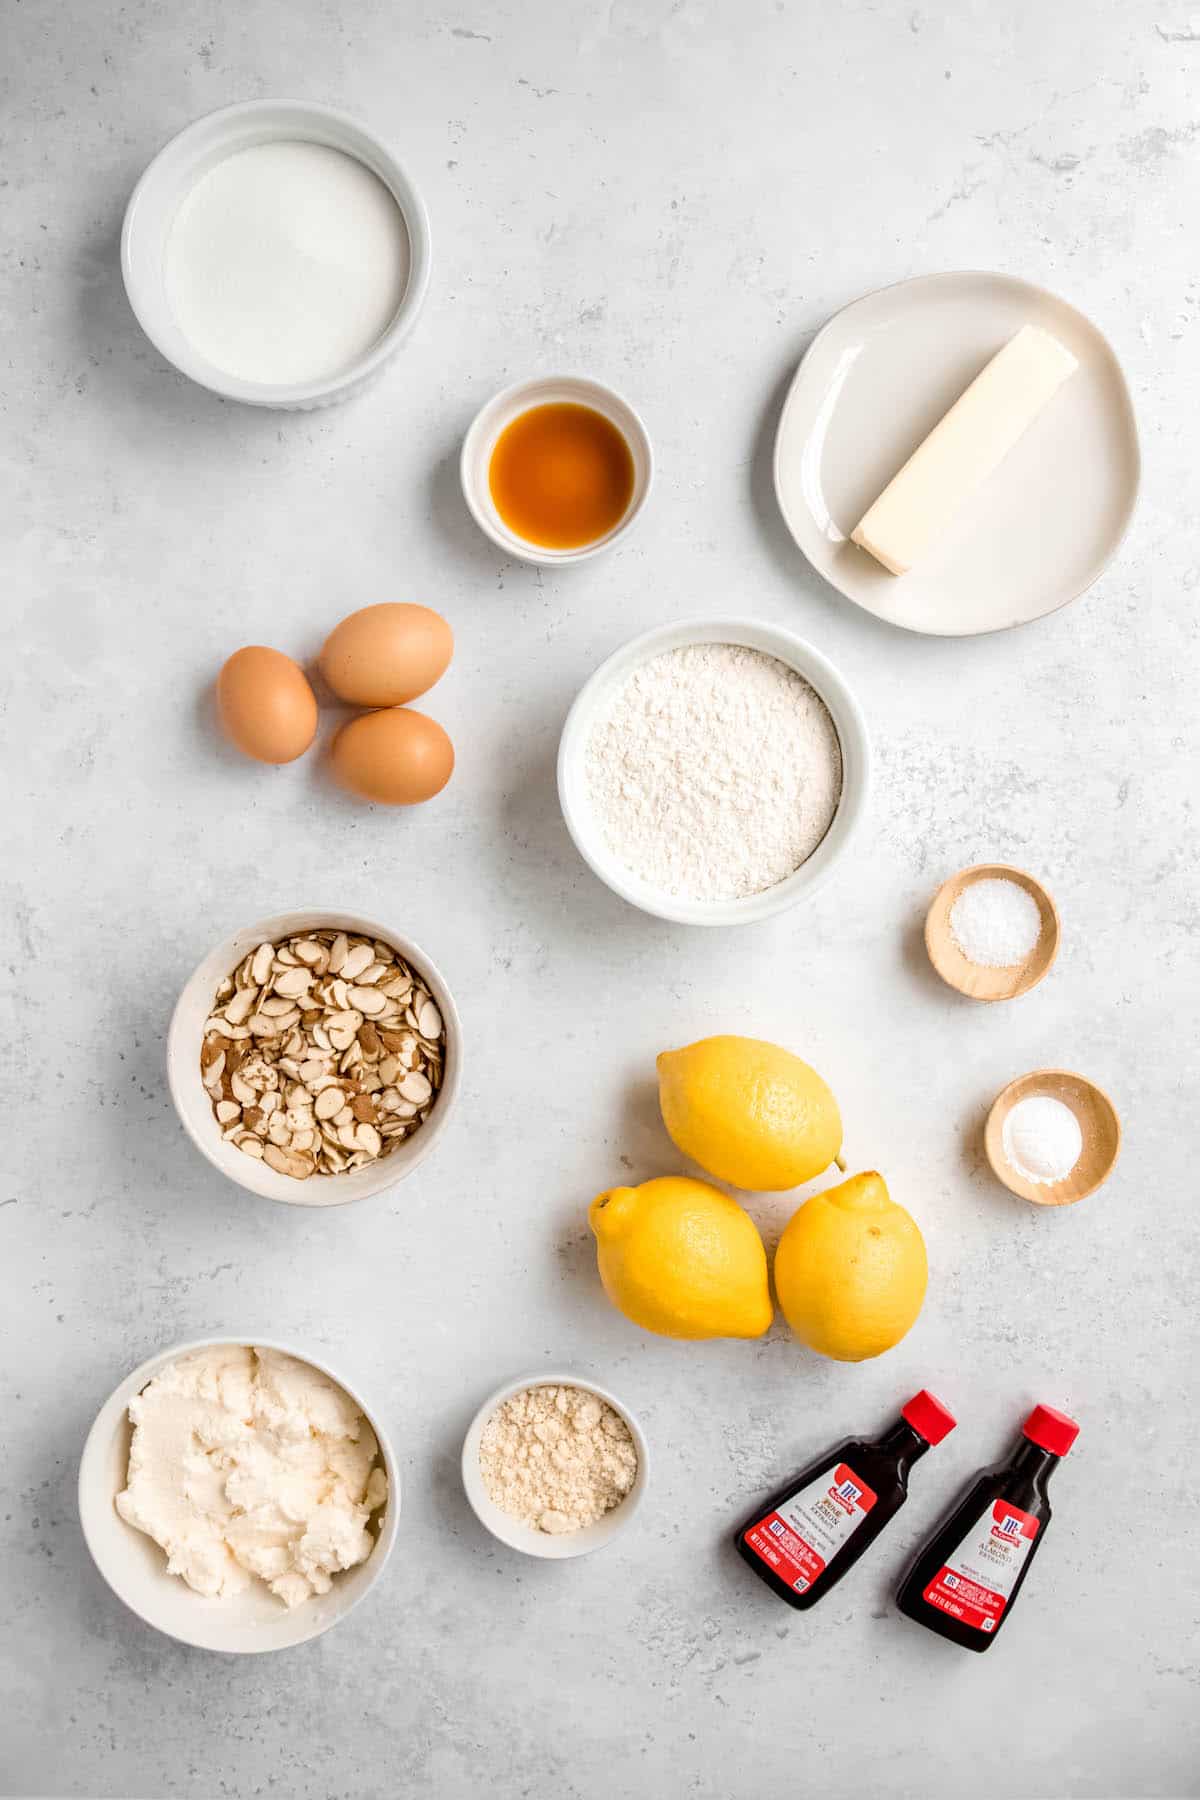 Ingredients needed to make Italian lemon ricotta cake with almond topping and lemony whipped ricotta.